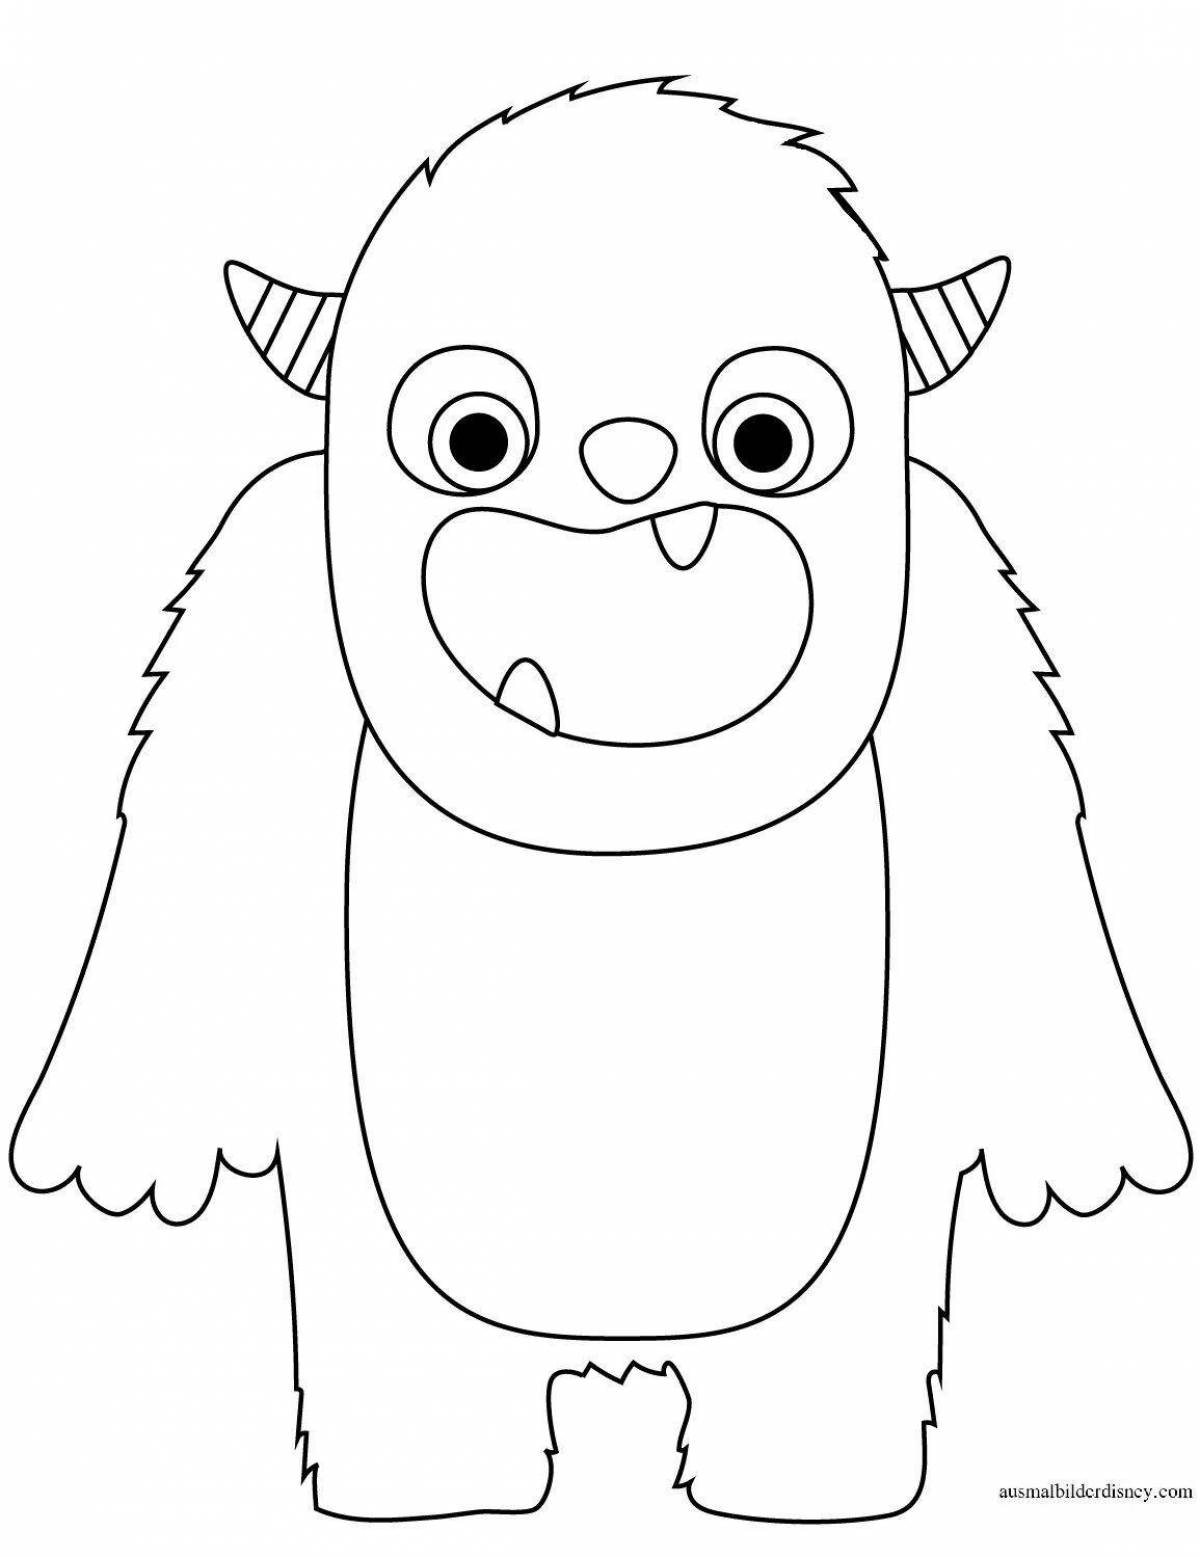 Exotic coloring pages monsters around the princess